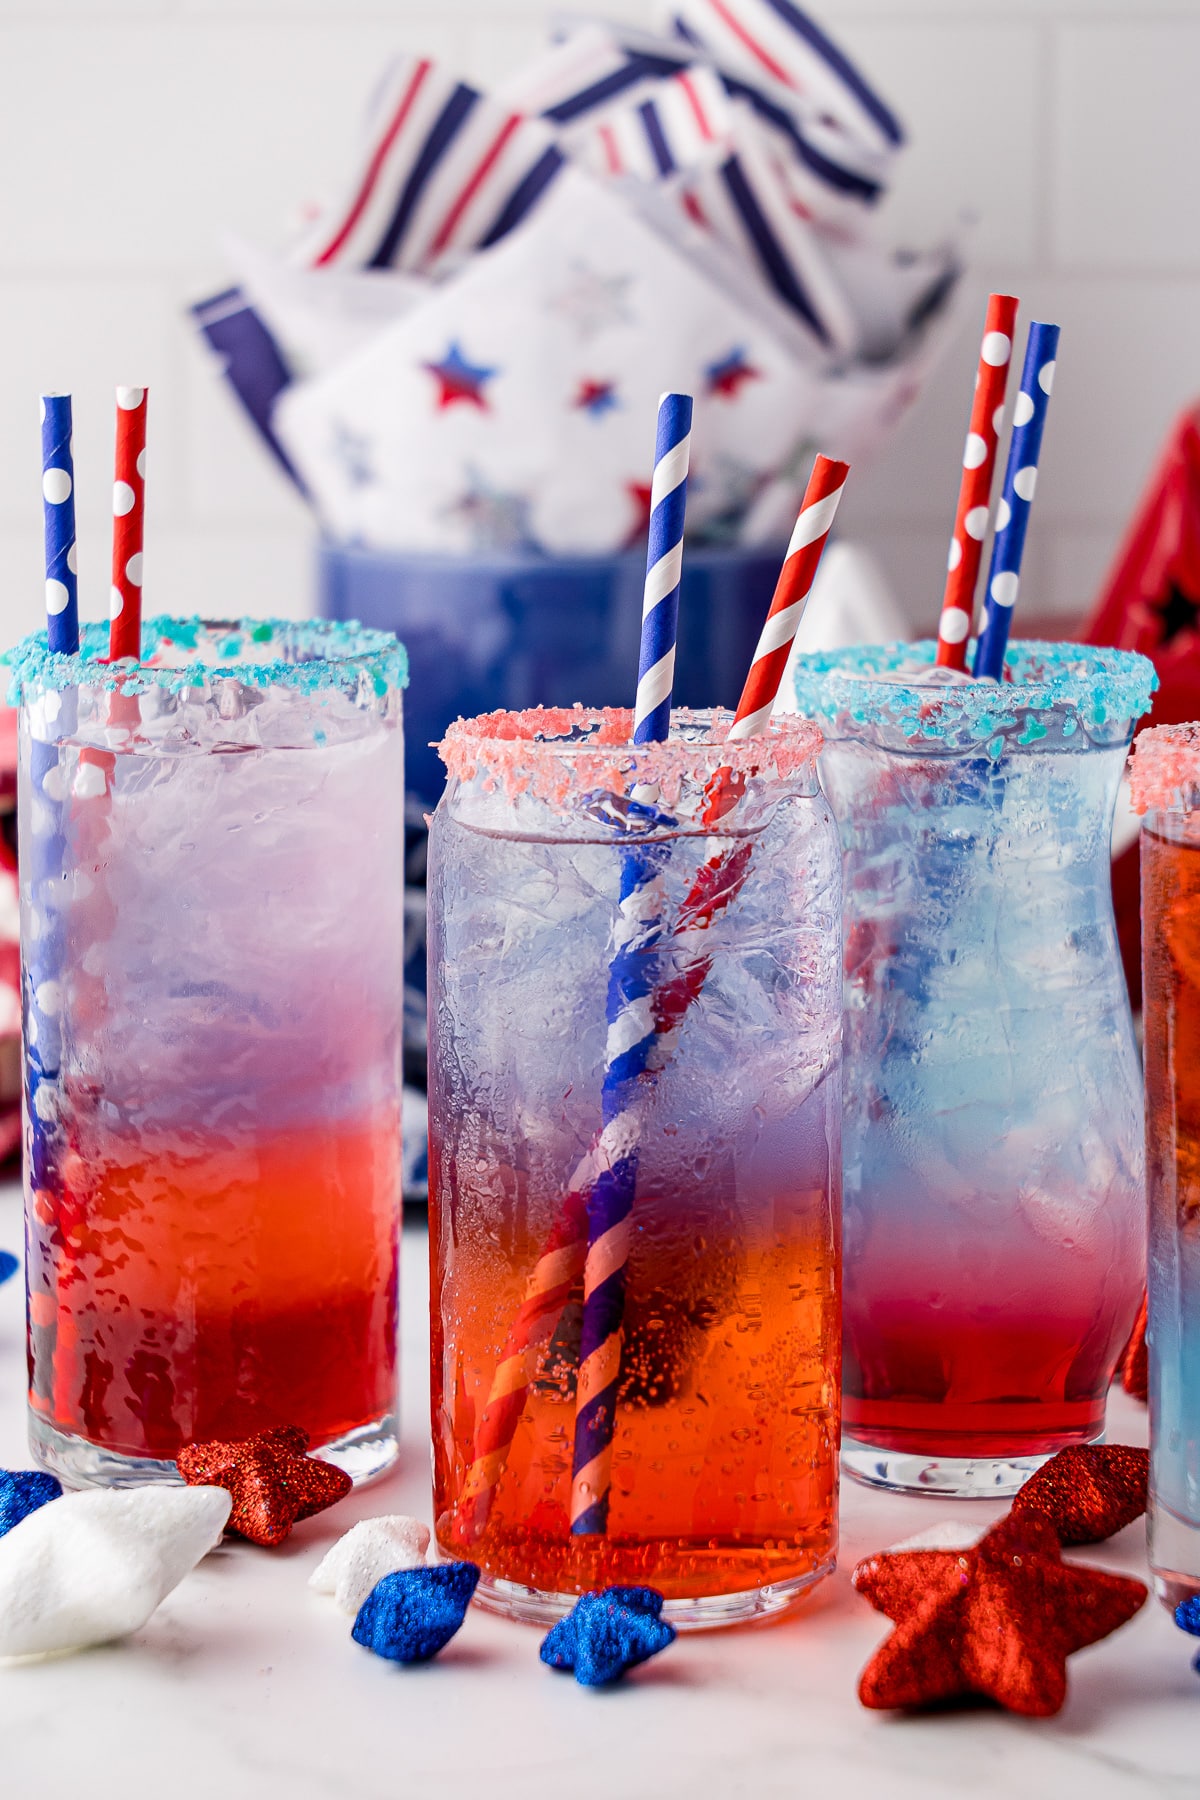 3 glasses of red white and blue layered drink with 2 straws each, rimmed with pop rock like candy, and decorated with red white and blue star decor, and red, white and blue napkins